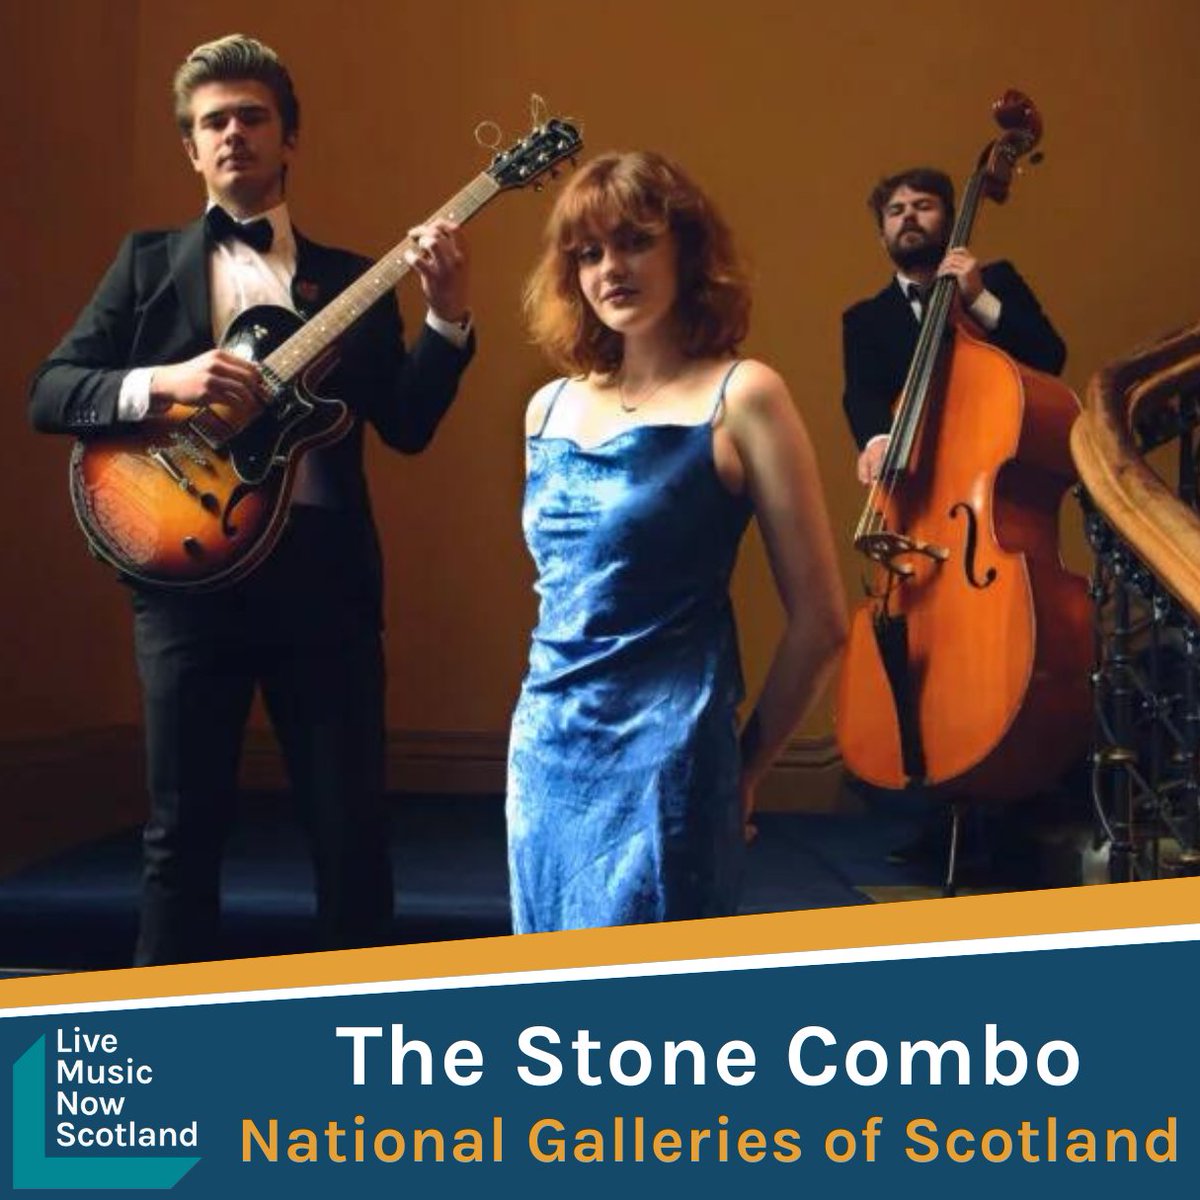 Coming up early May: #jazz #concert with The Stone Combo at @NatGalleriesSco . These LMNS performances tend to fill up fast, so order your free ticket now: nationalgalleries.org/event/live-mus…